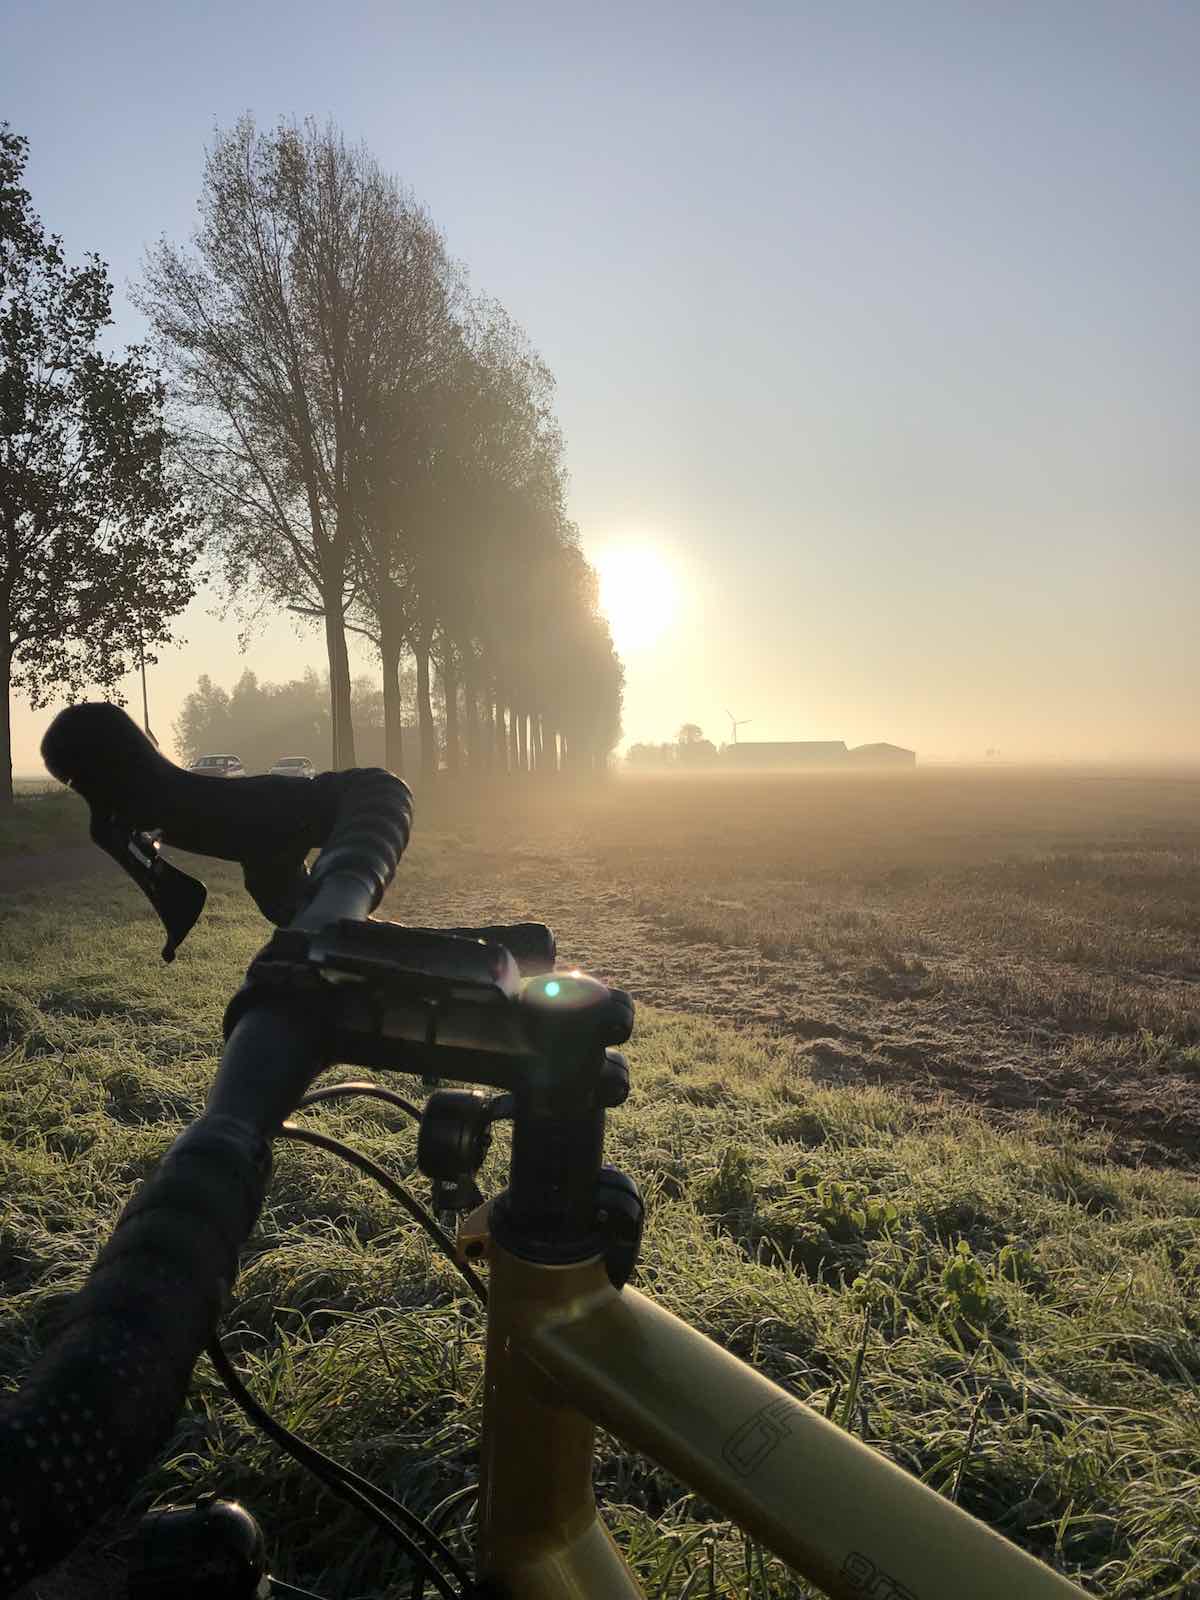 bikerumor pic of the day bicycle in Haarlemmermeer in the Netherlands, tall trees on the left with the morning sun peeking out behind them.